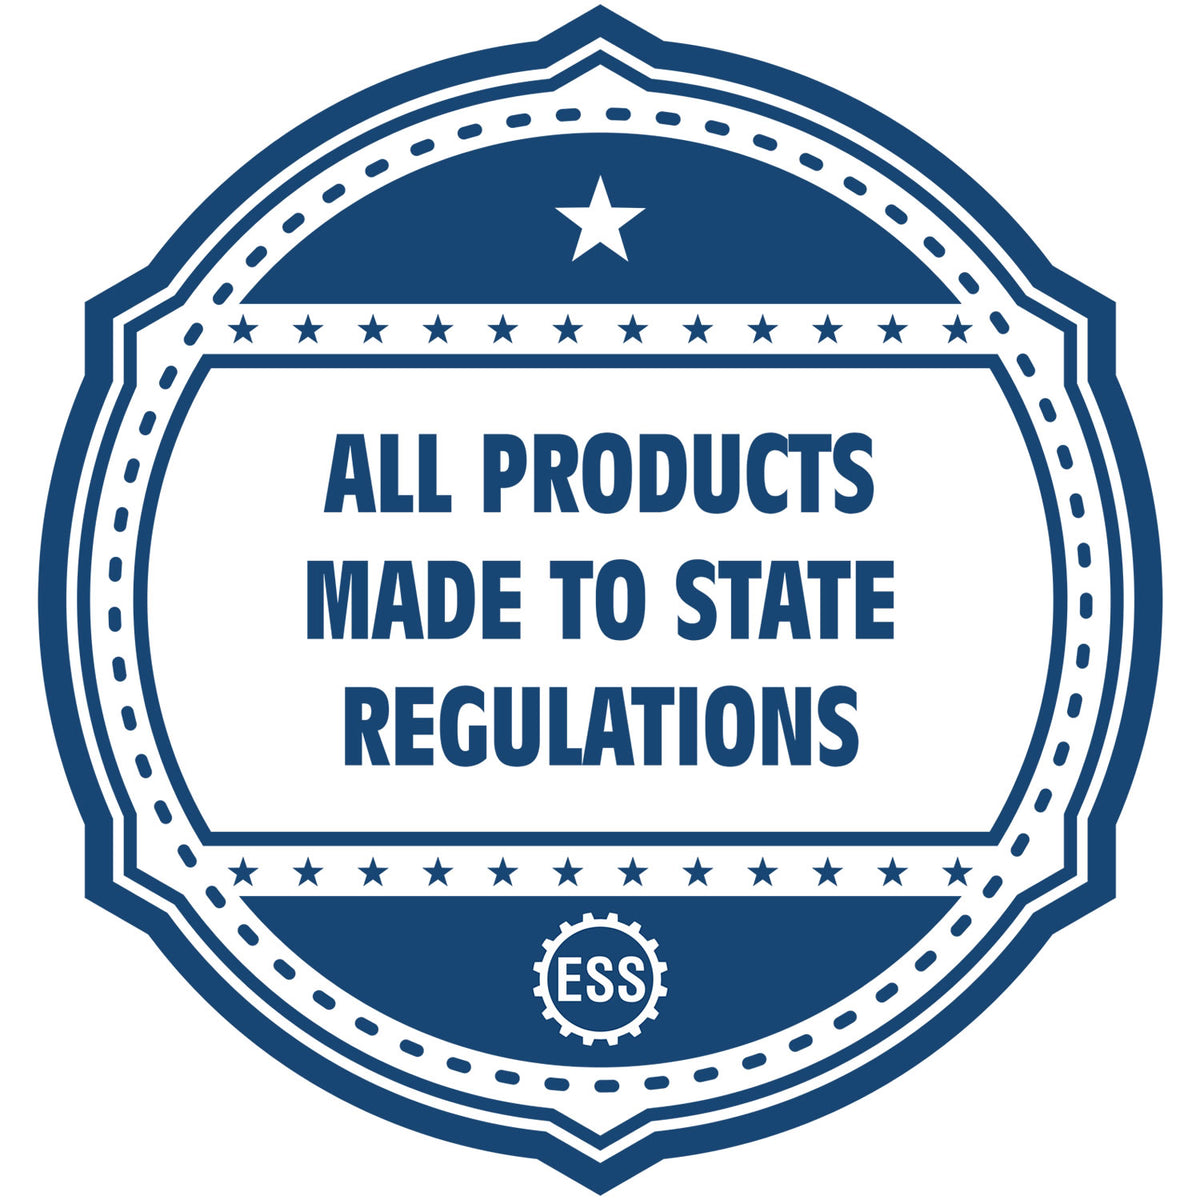 An icon or badge element for the MaxLight Premium Pre-Inked Virginia State Seal Notarial Stamp showing that this product is made in compliance with state regulations.